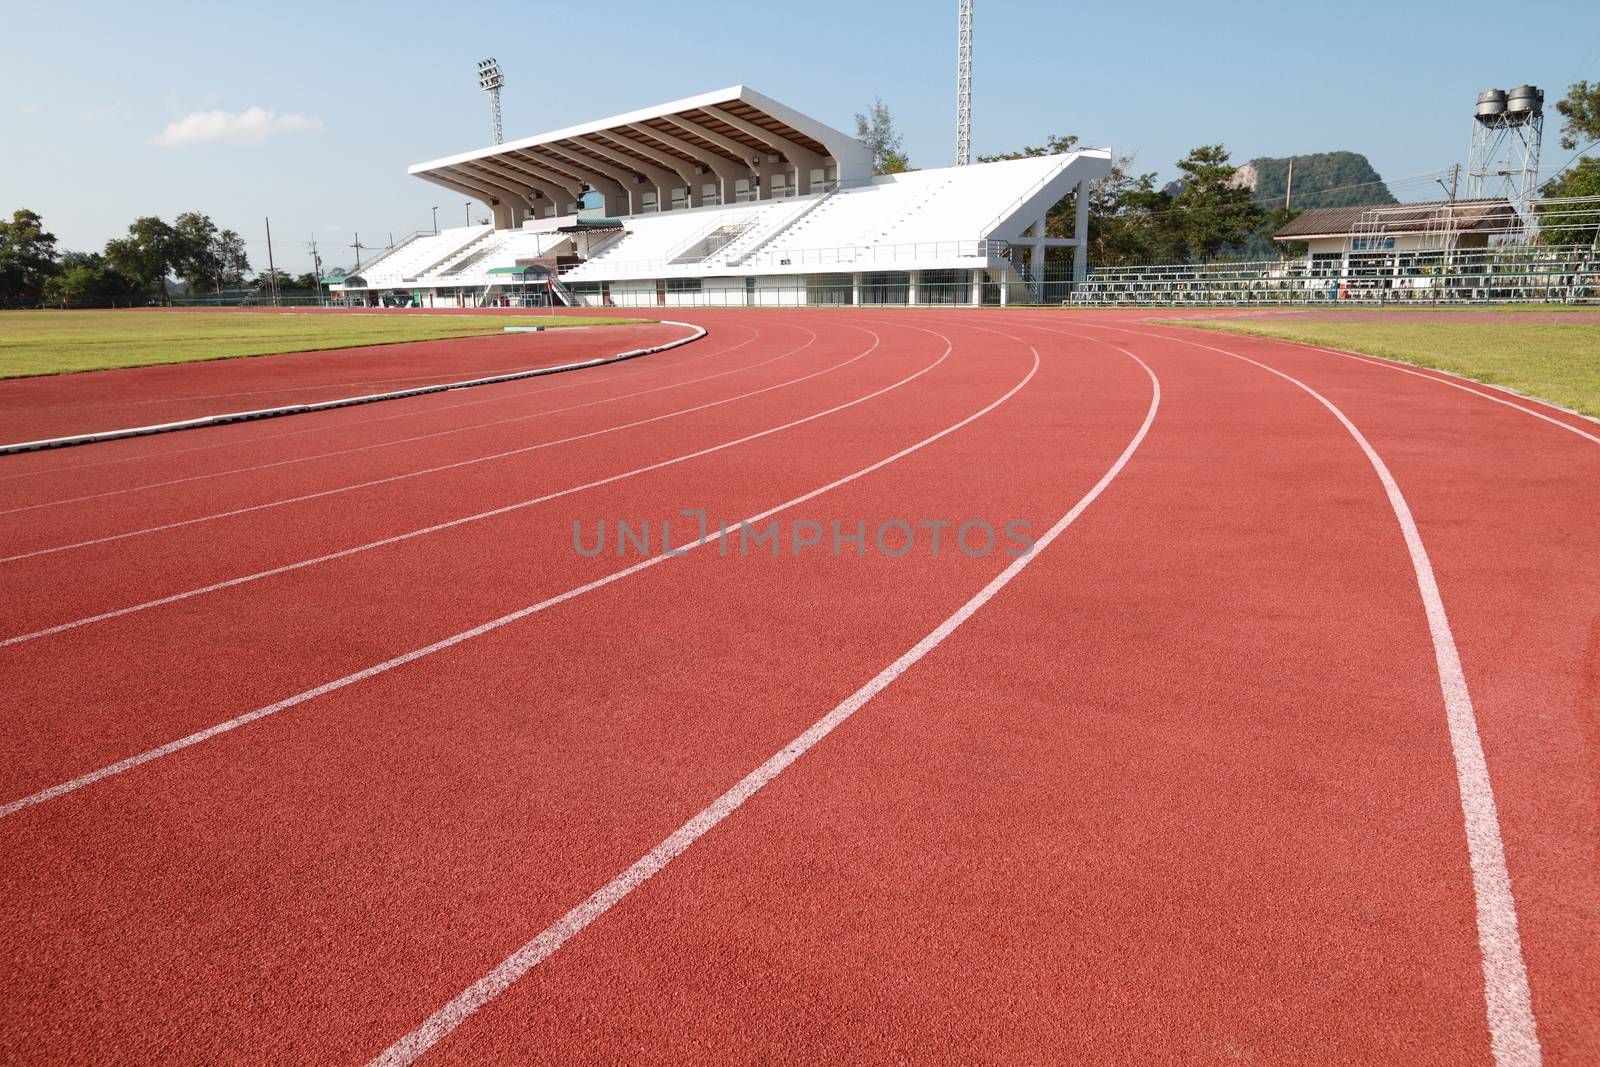 New running track and grandstand